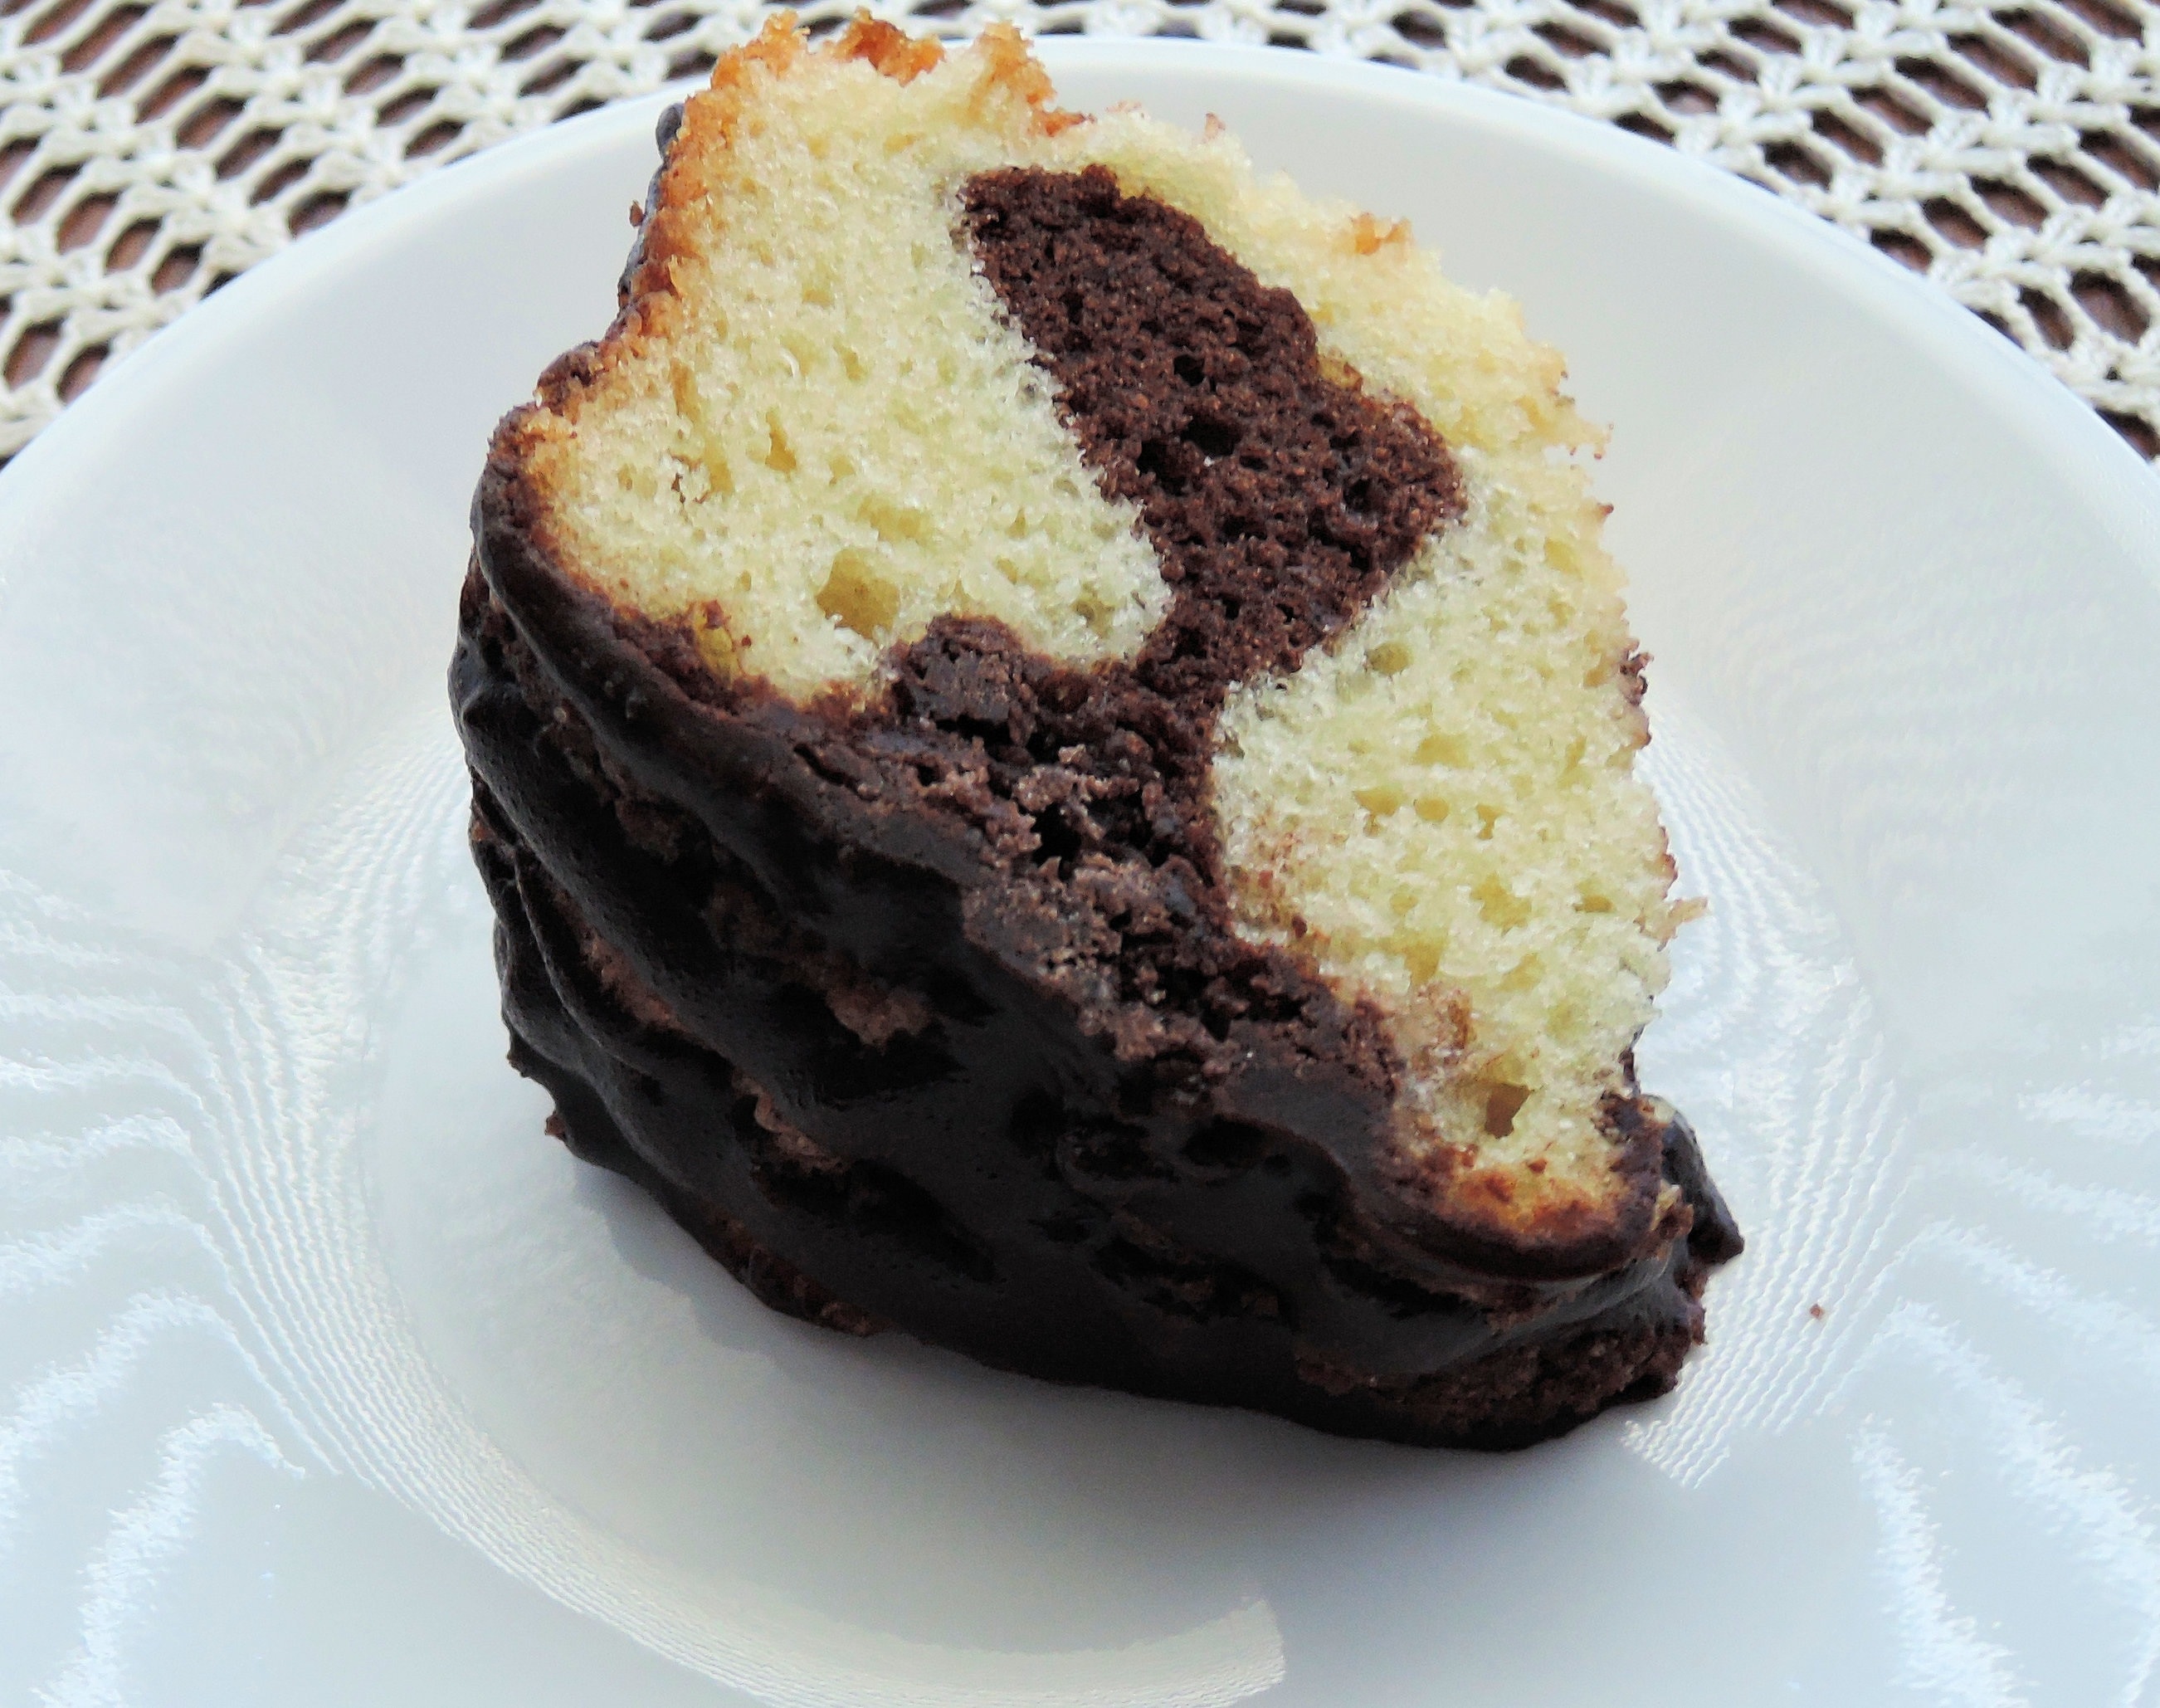 brown pastry with chocolate frosting